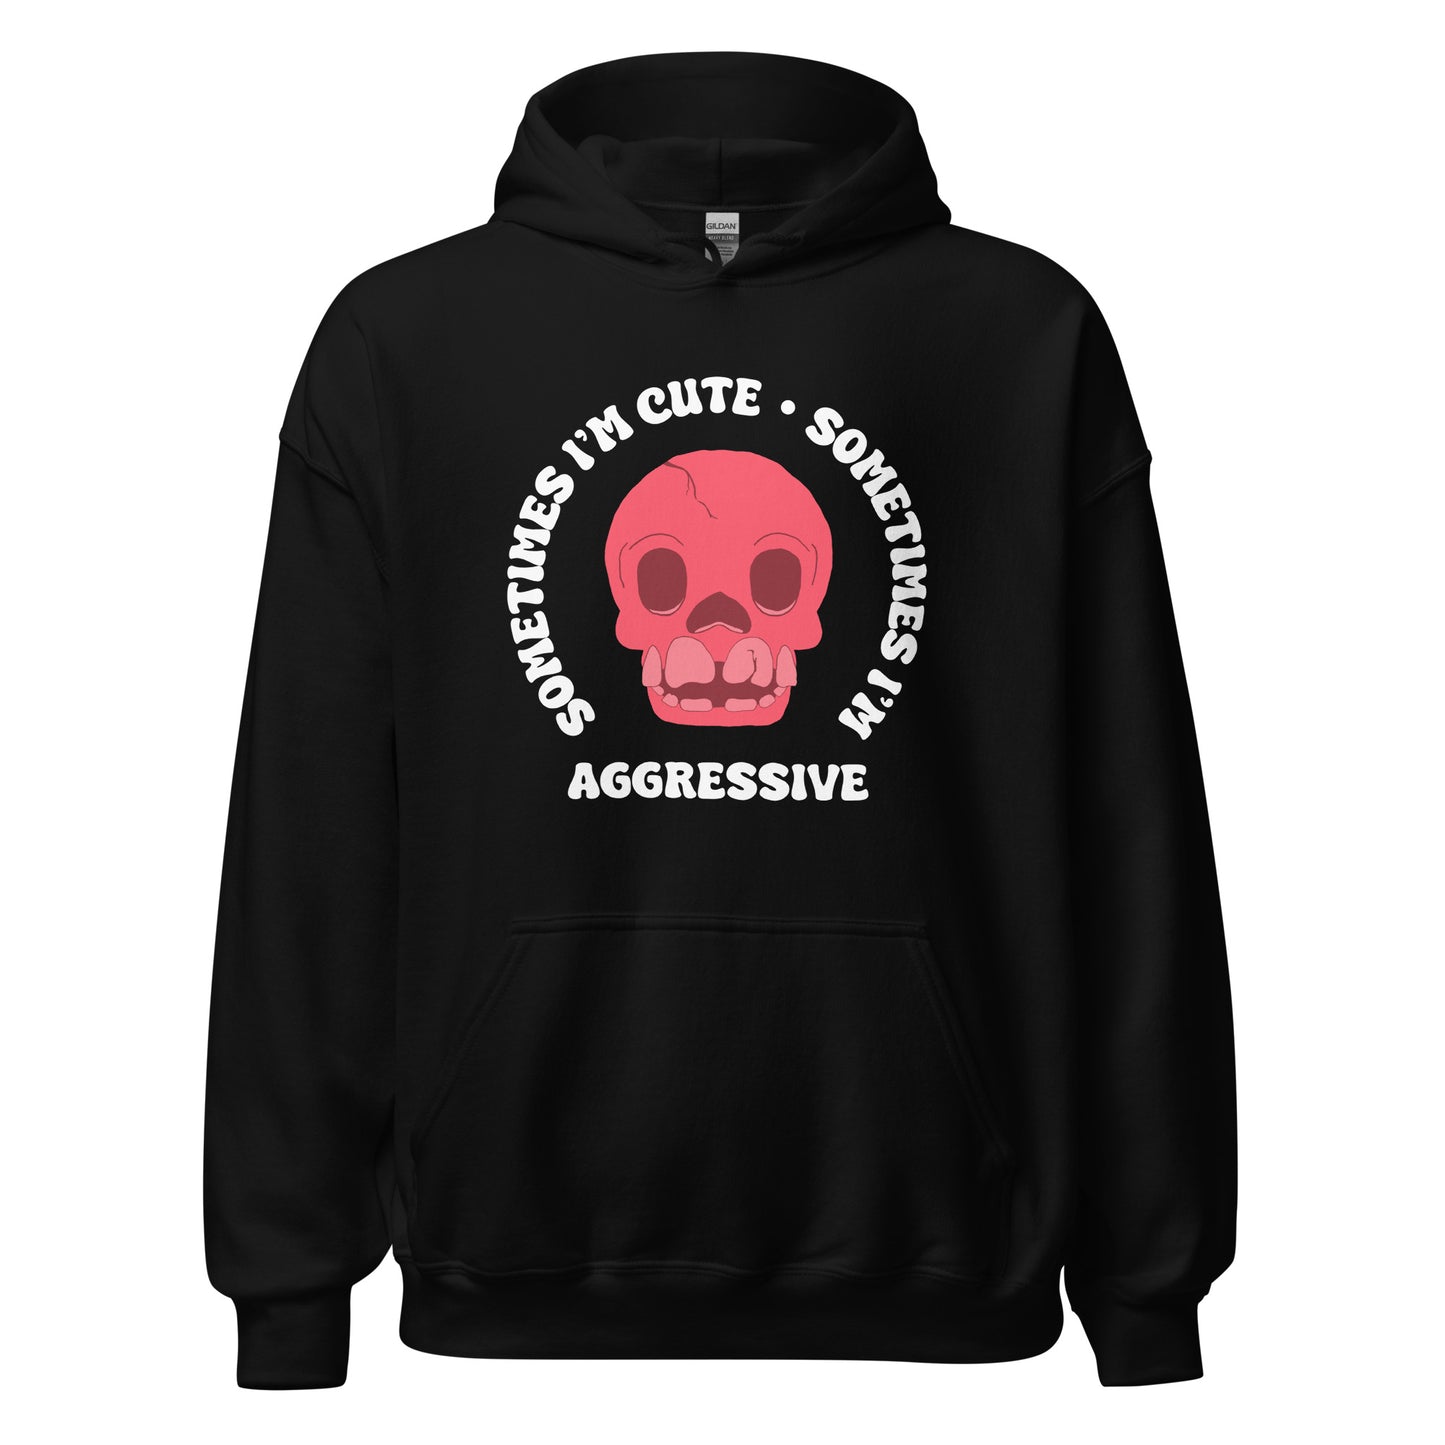 SOMETIMES AGGRESSIVE Hoodie Pullover